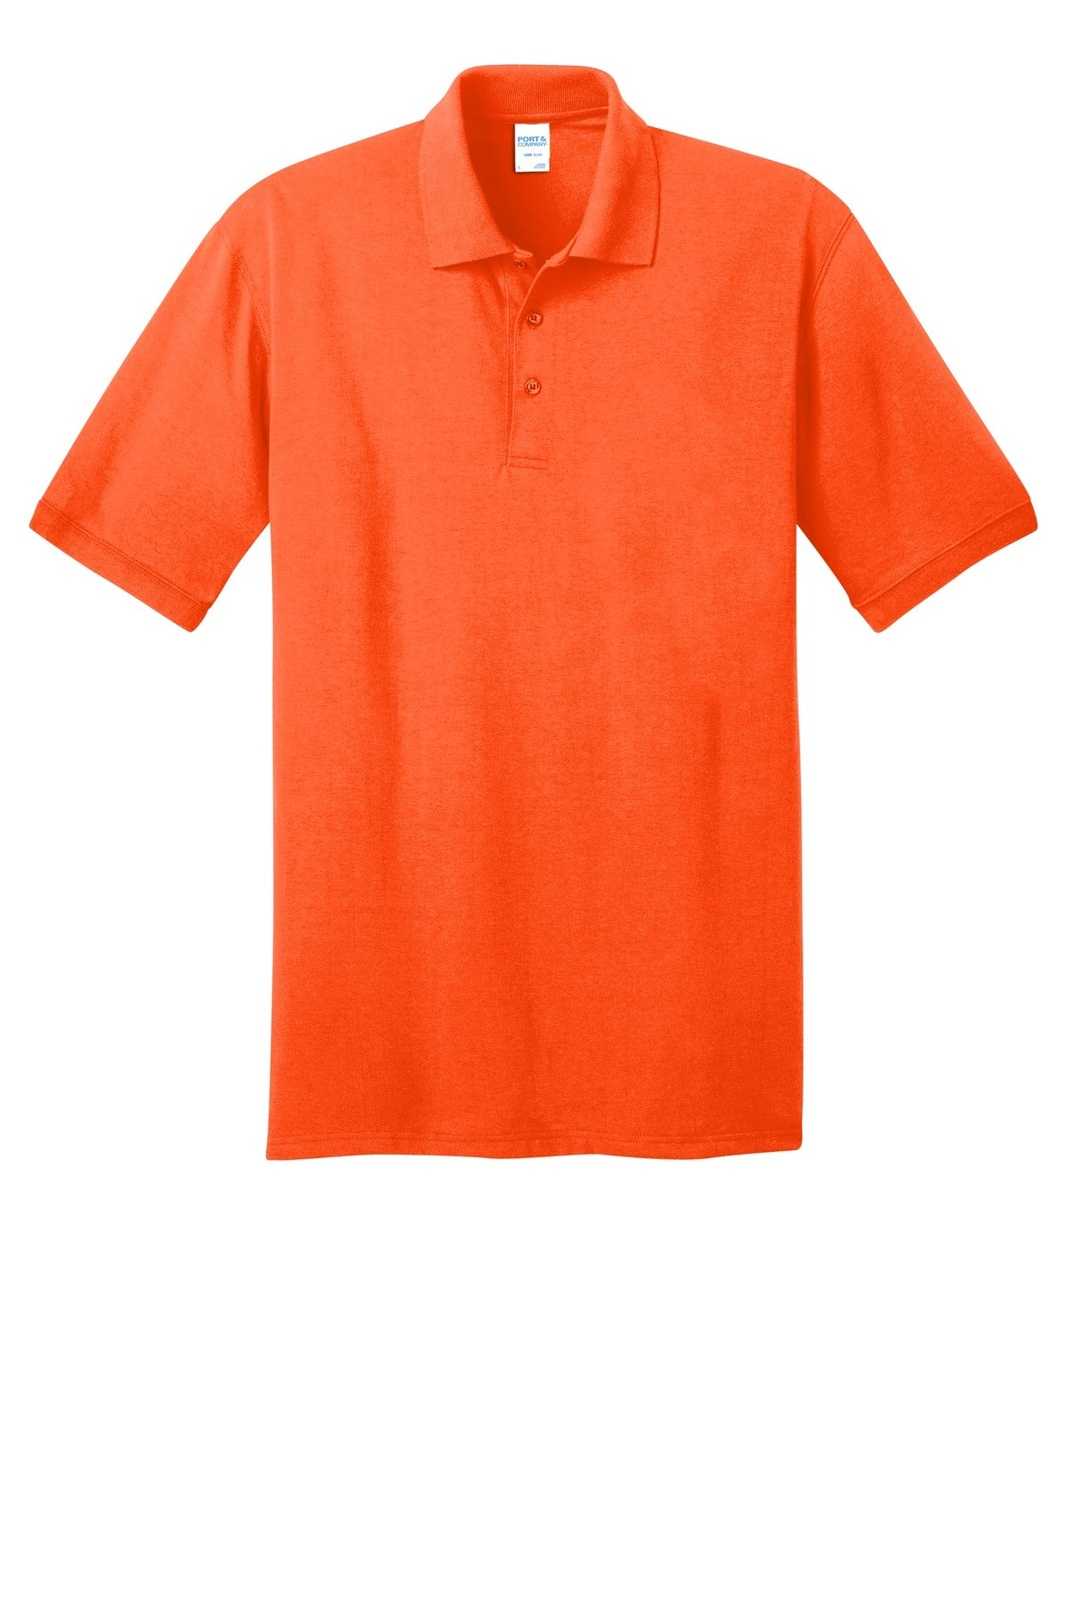 Port & Company KP55T Tall Core Blend Jersey Knit Polo - Safety Orange - HIT a Double - 1